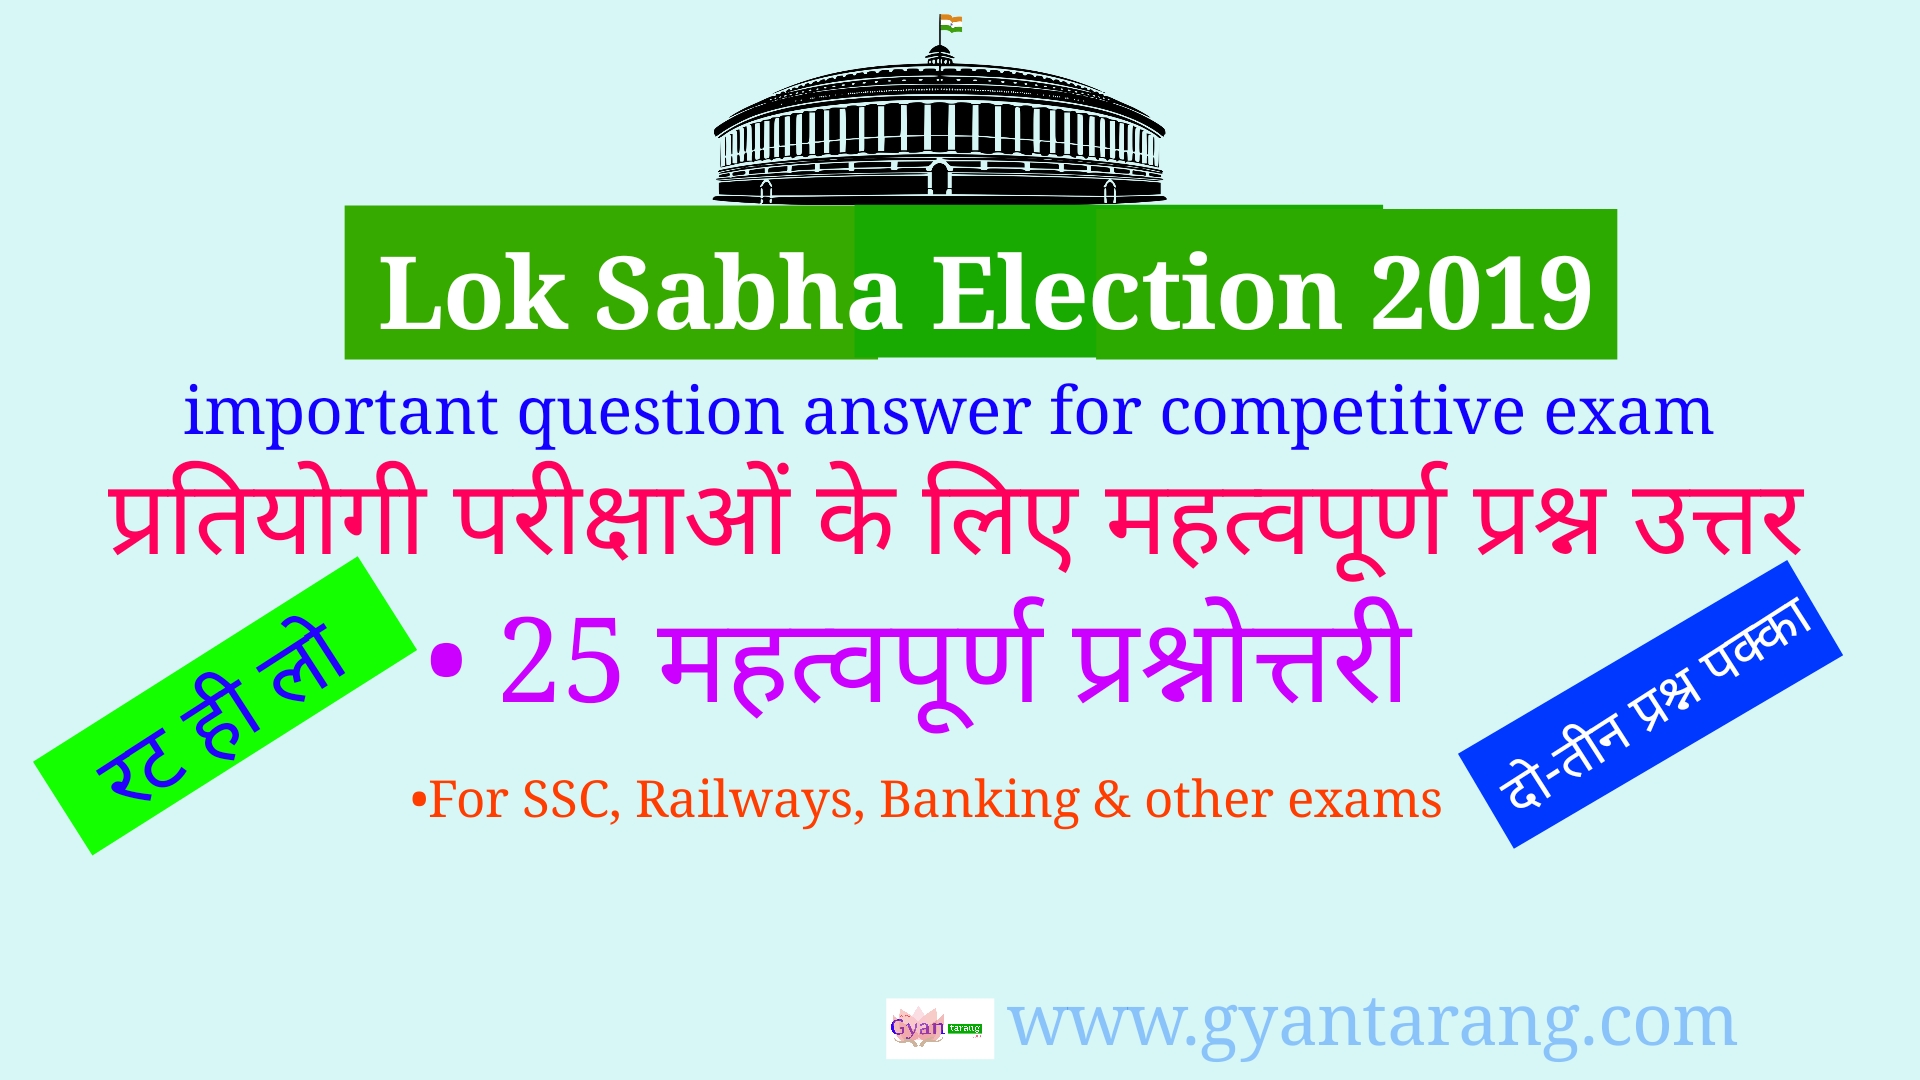 Lok sabha election, 2019 Question and Answer in Hindi